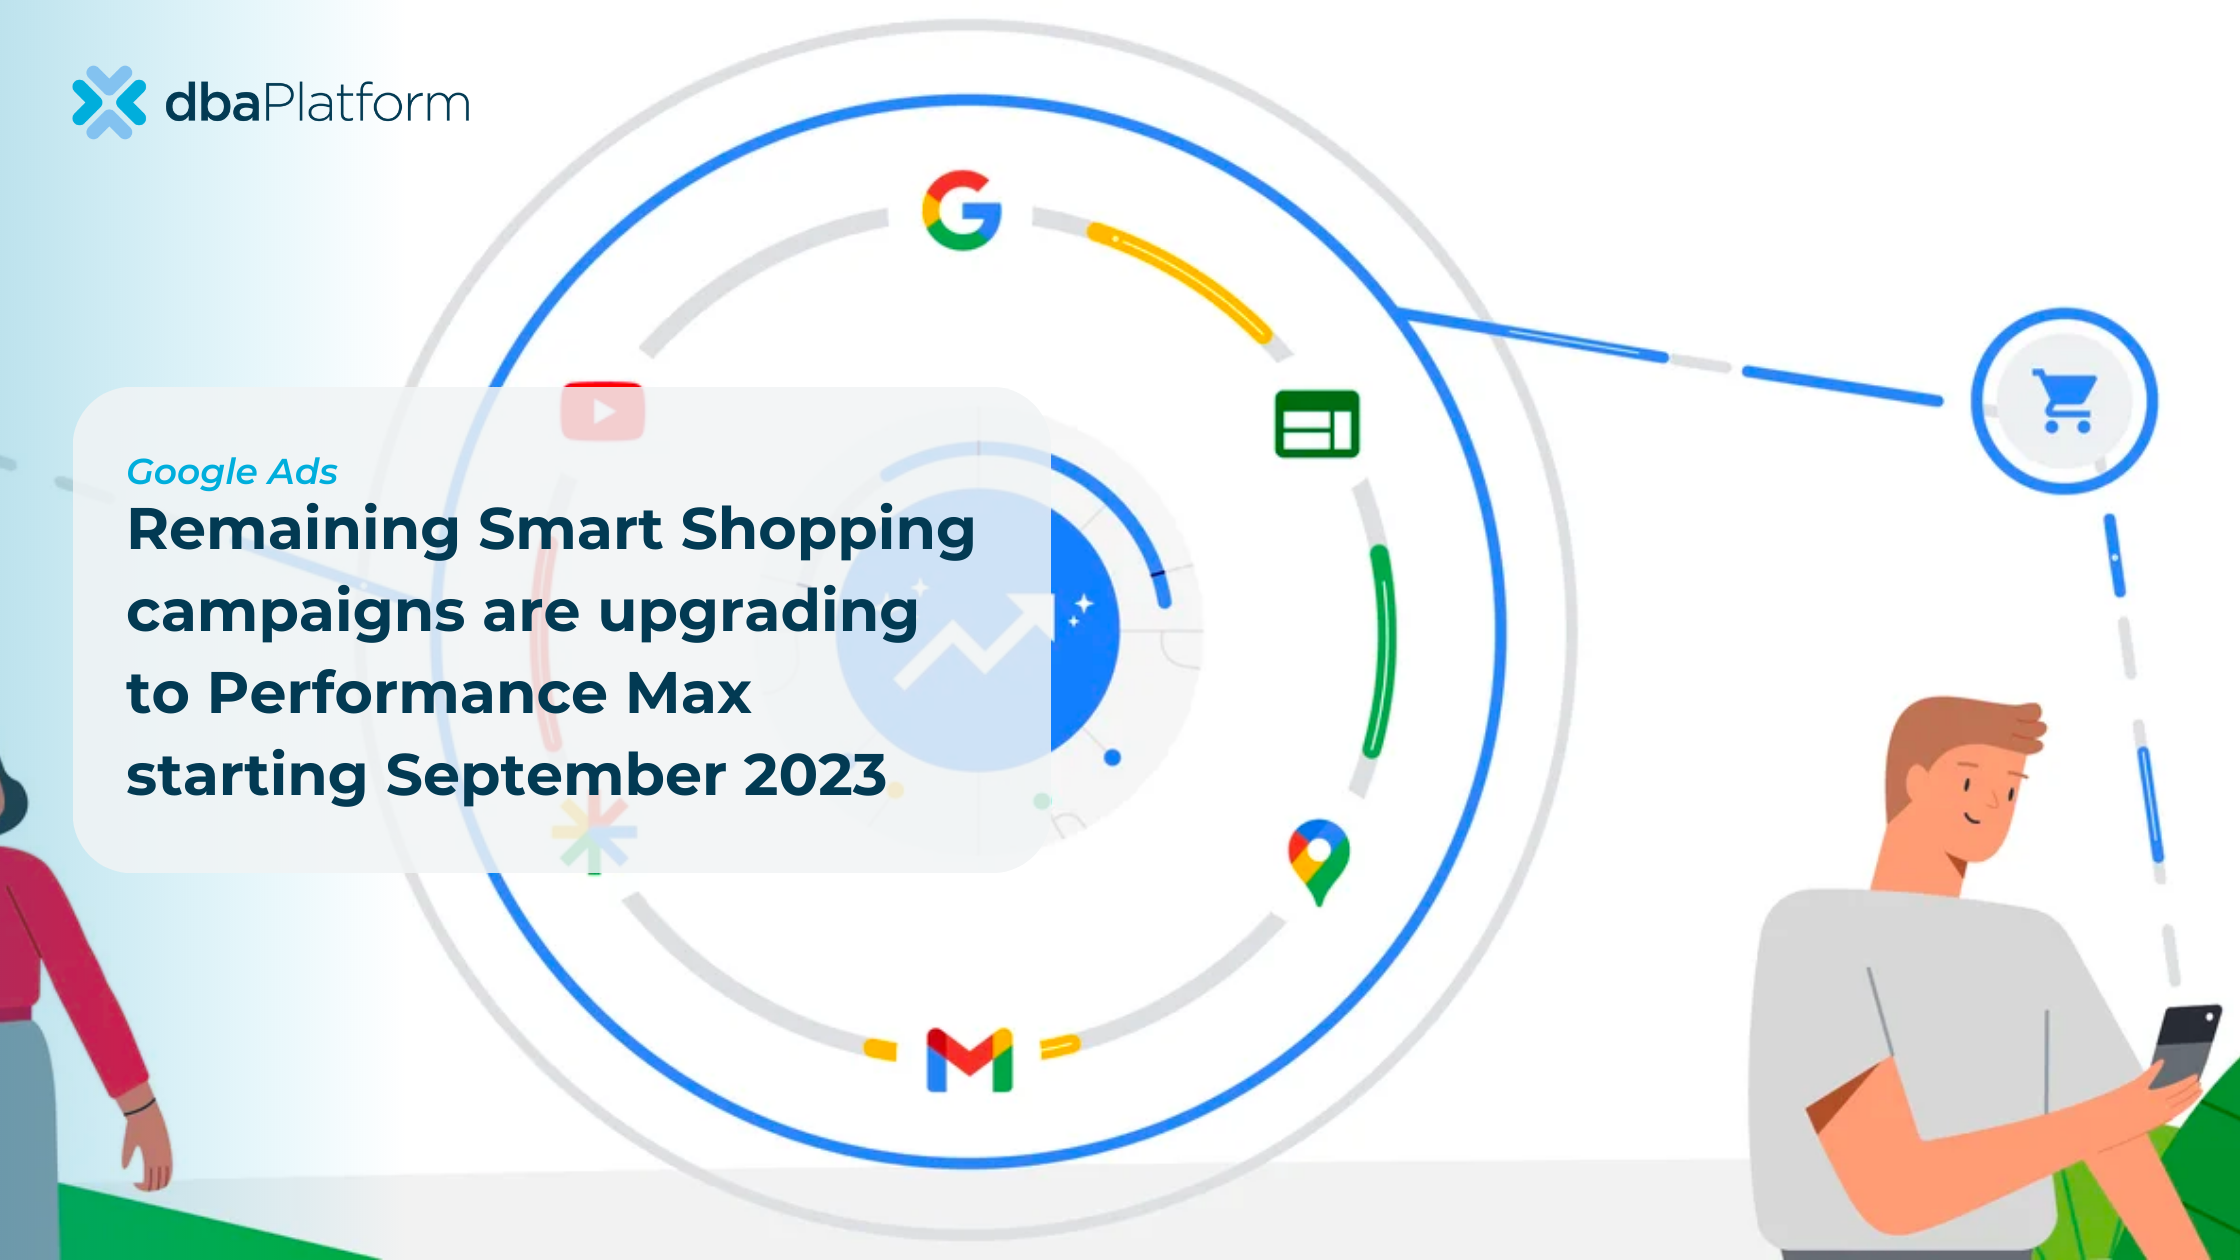 Remaining Smart Shopping campaigns are upgrading to Performance Max starting September 2023